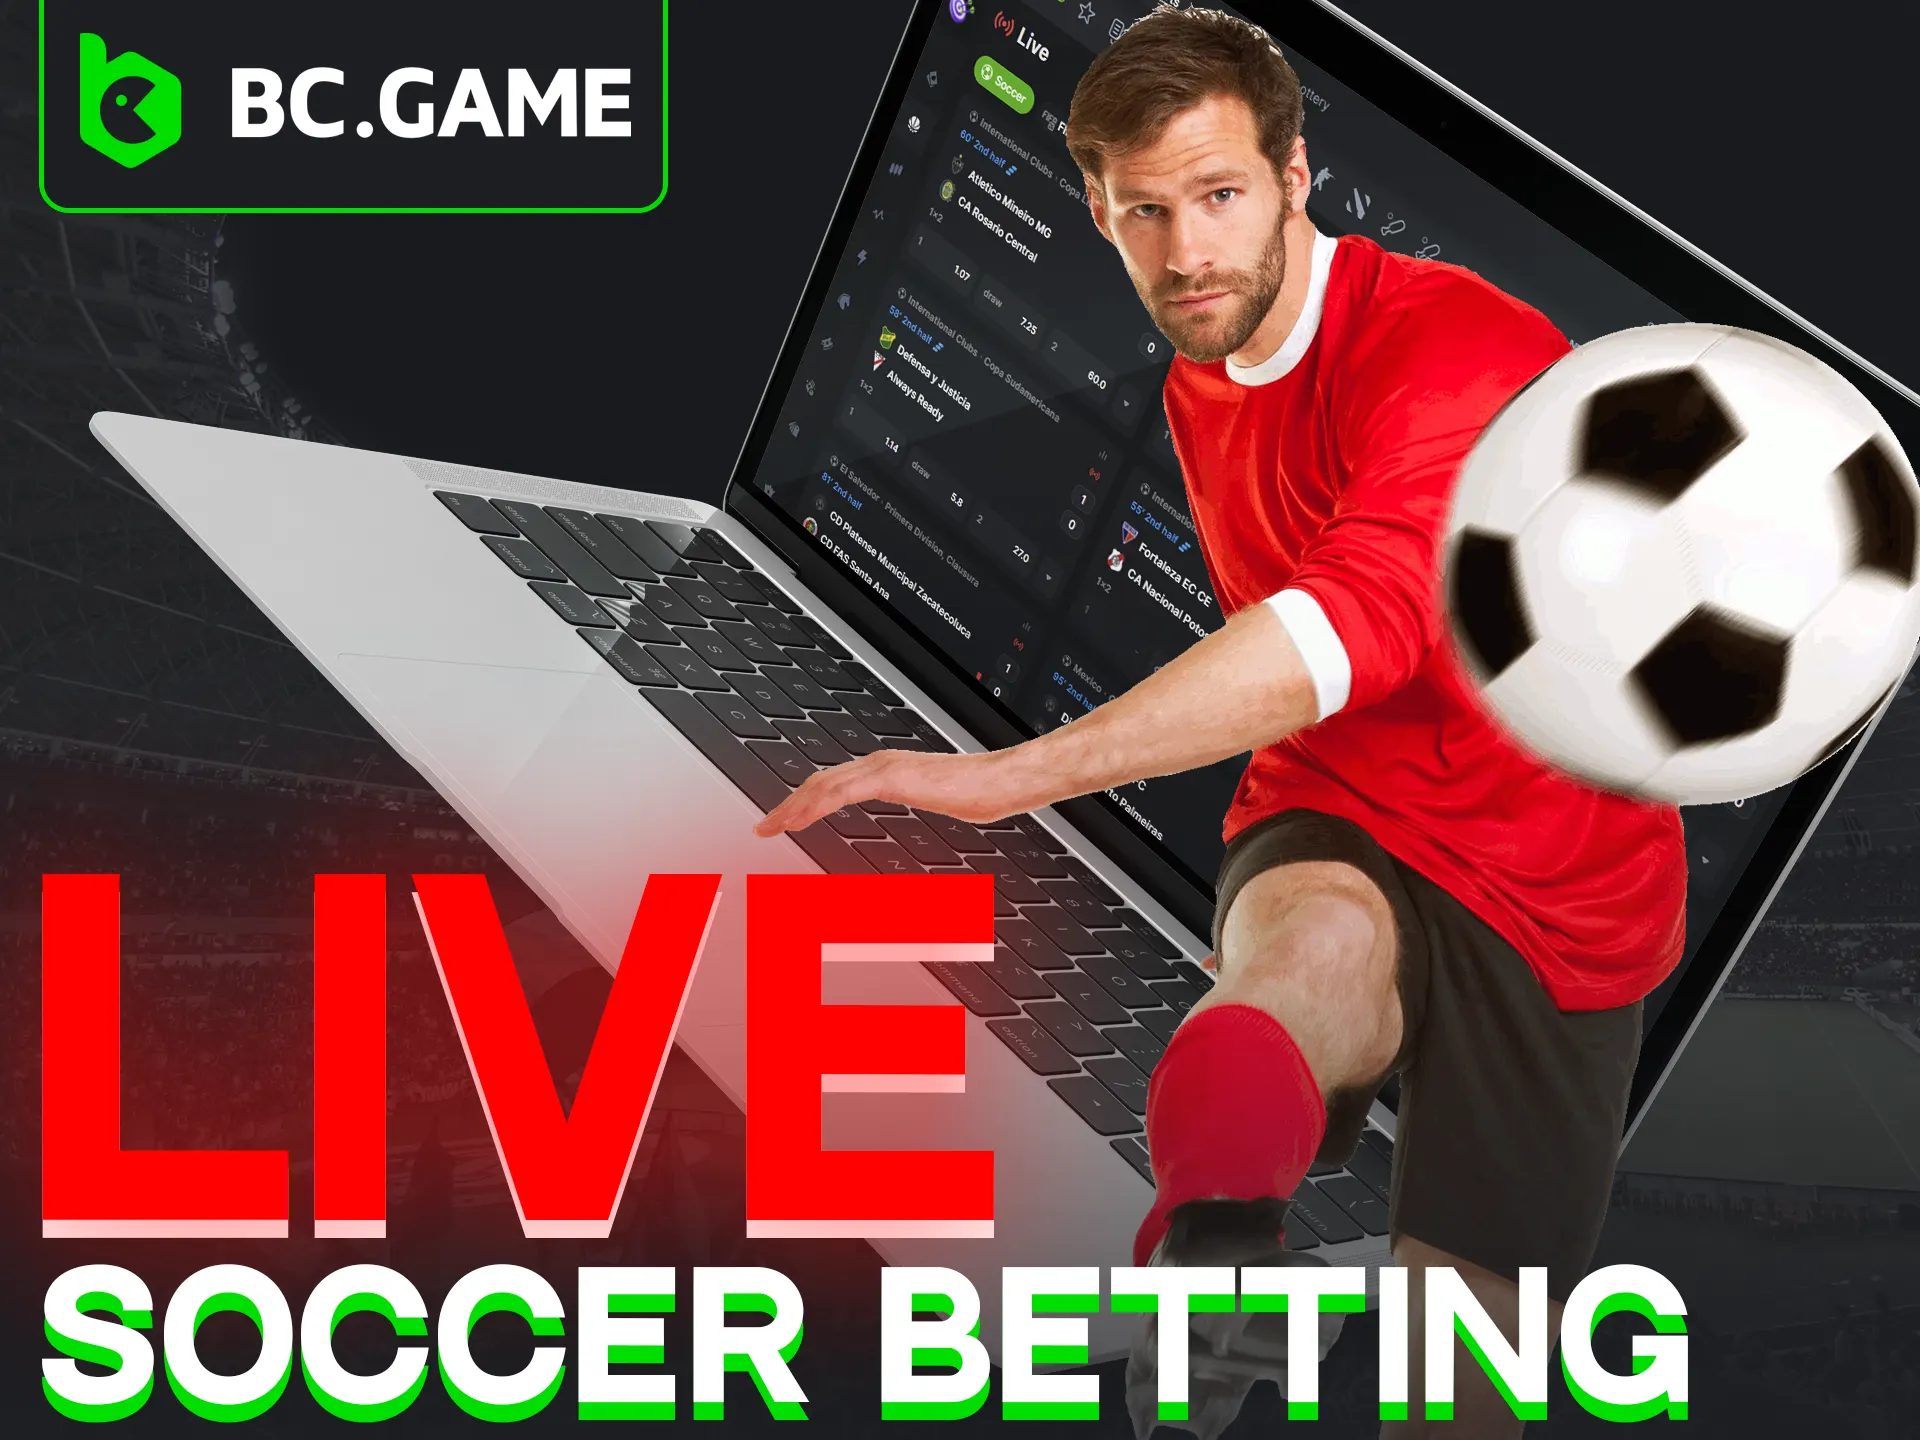 Bet live on soccer matches at BC Game for bigger wins.